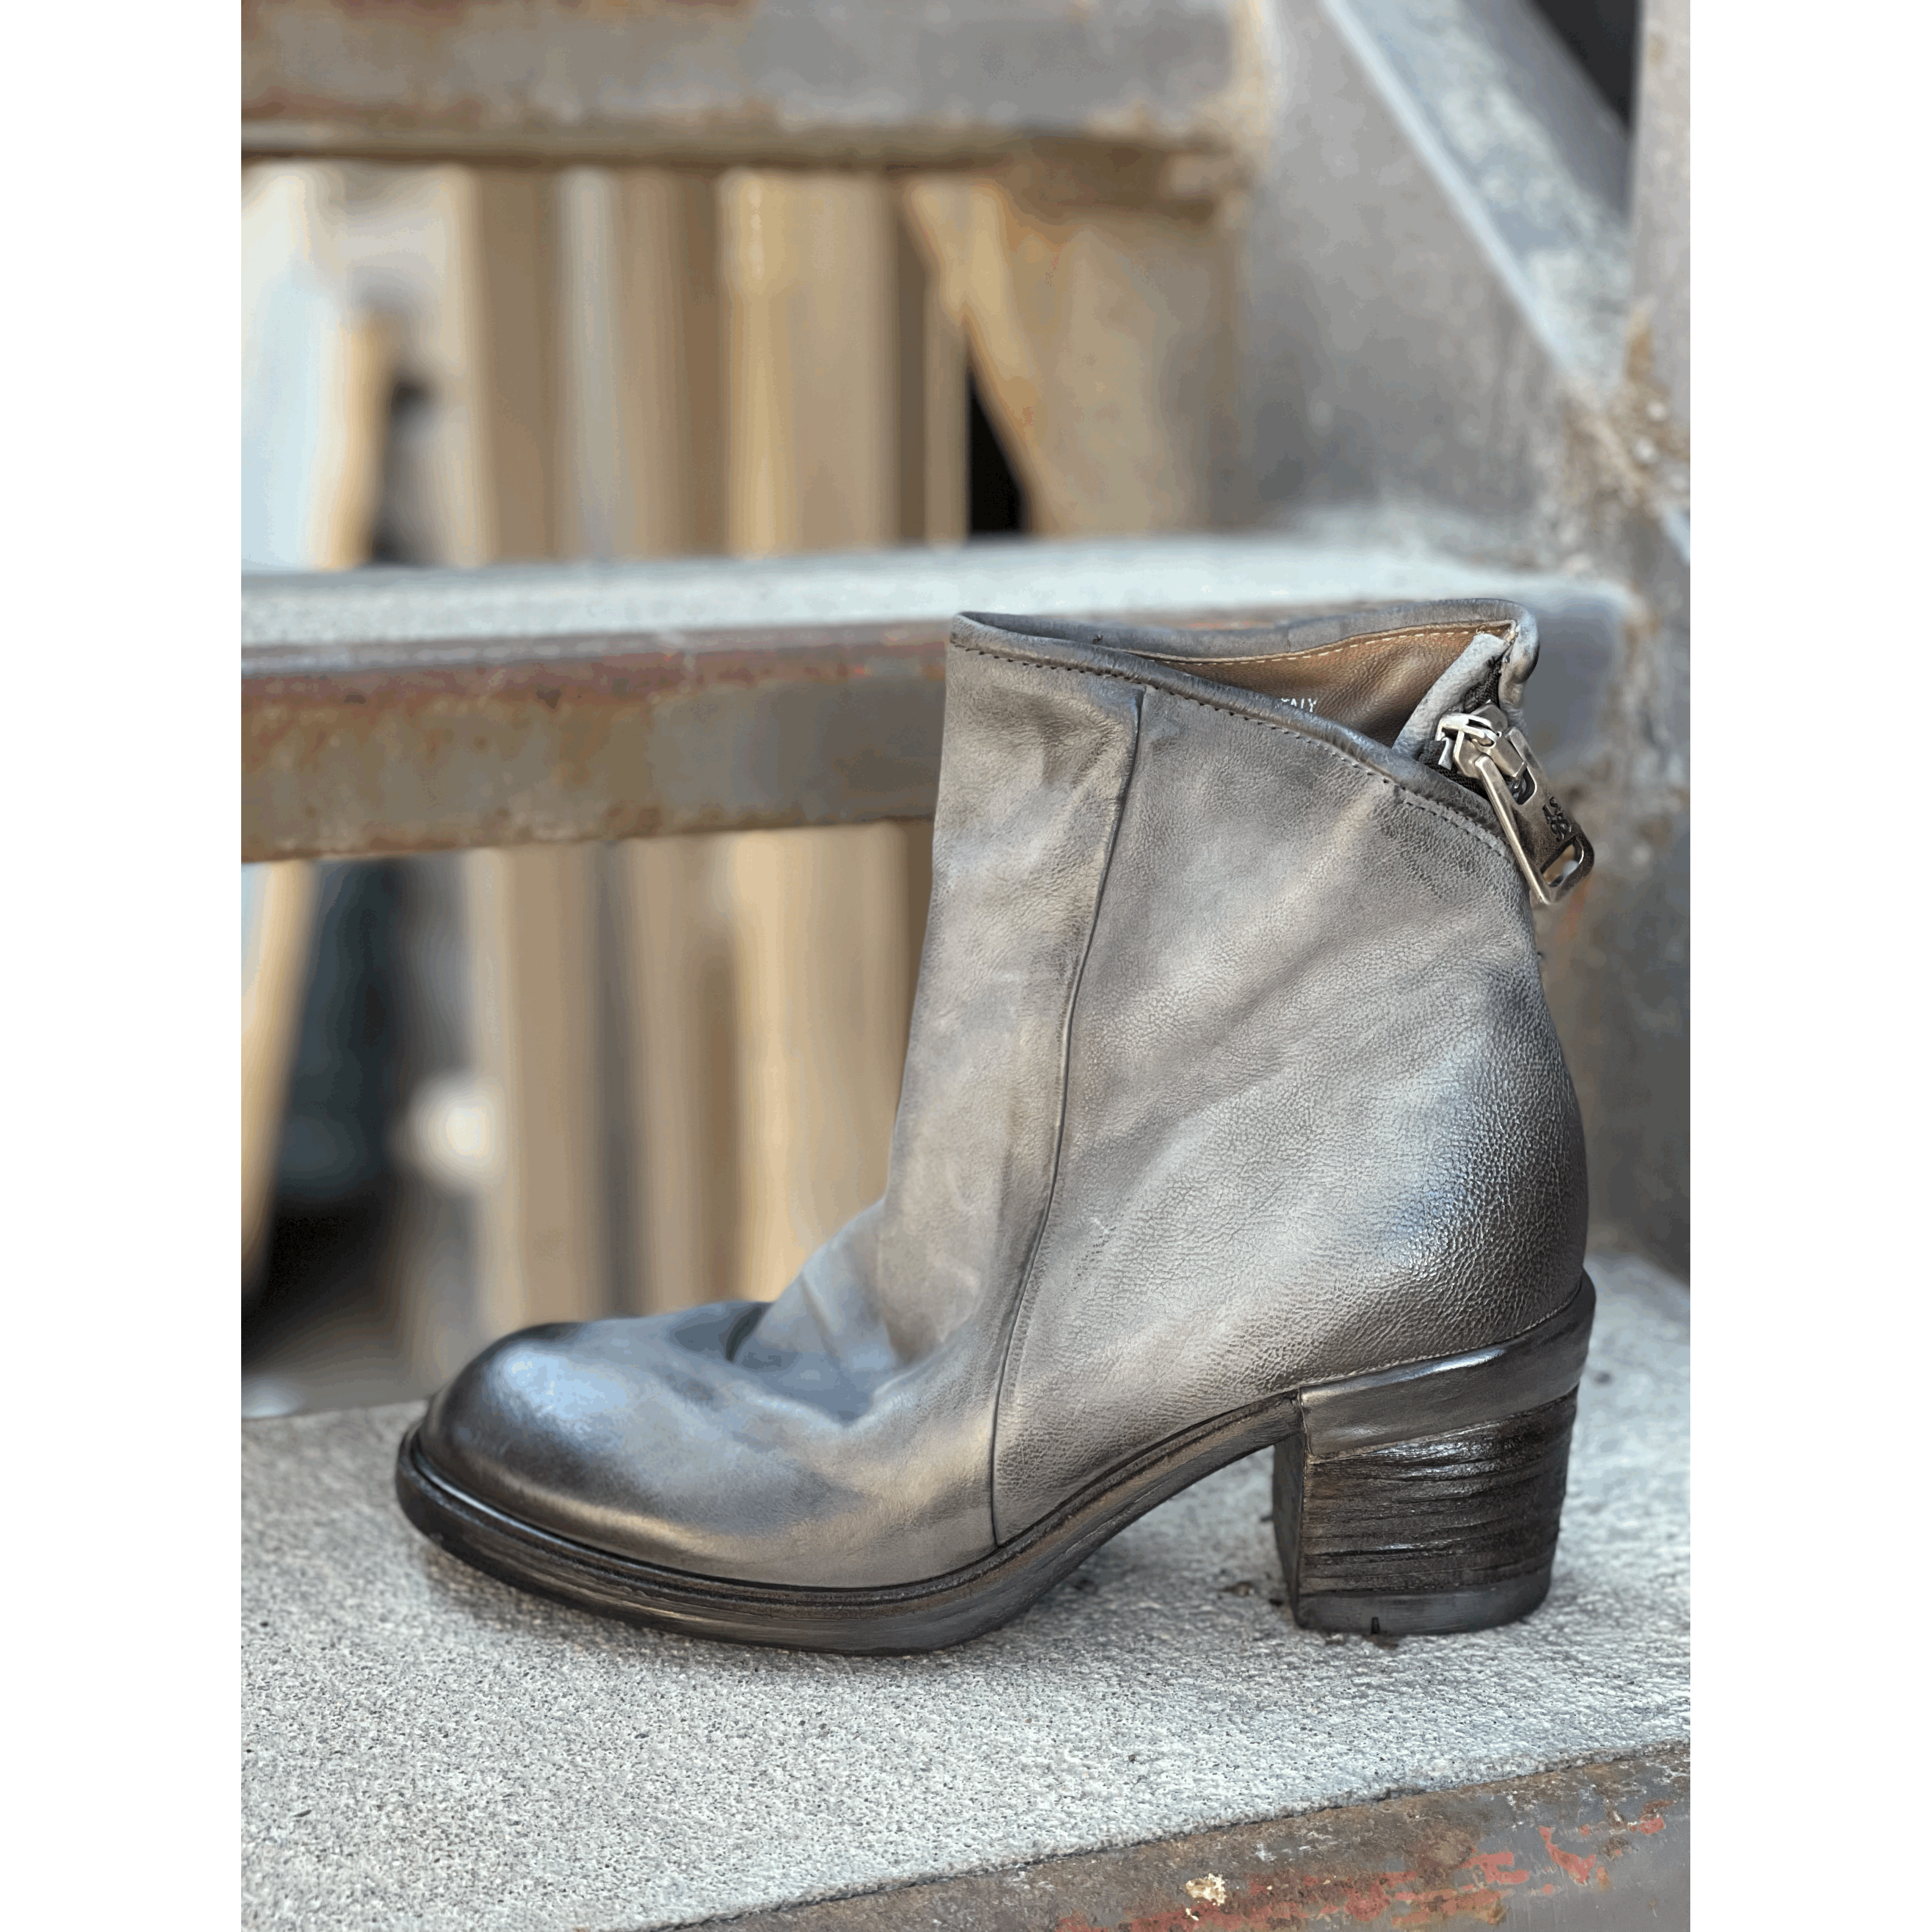 AS98 - Mid Calf Boot in Smoke-SQ5234537